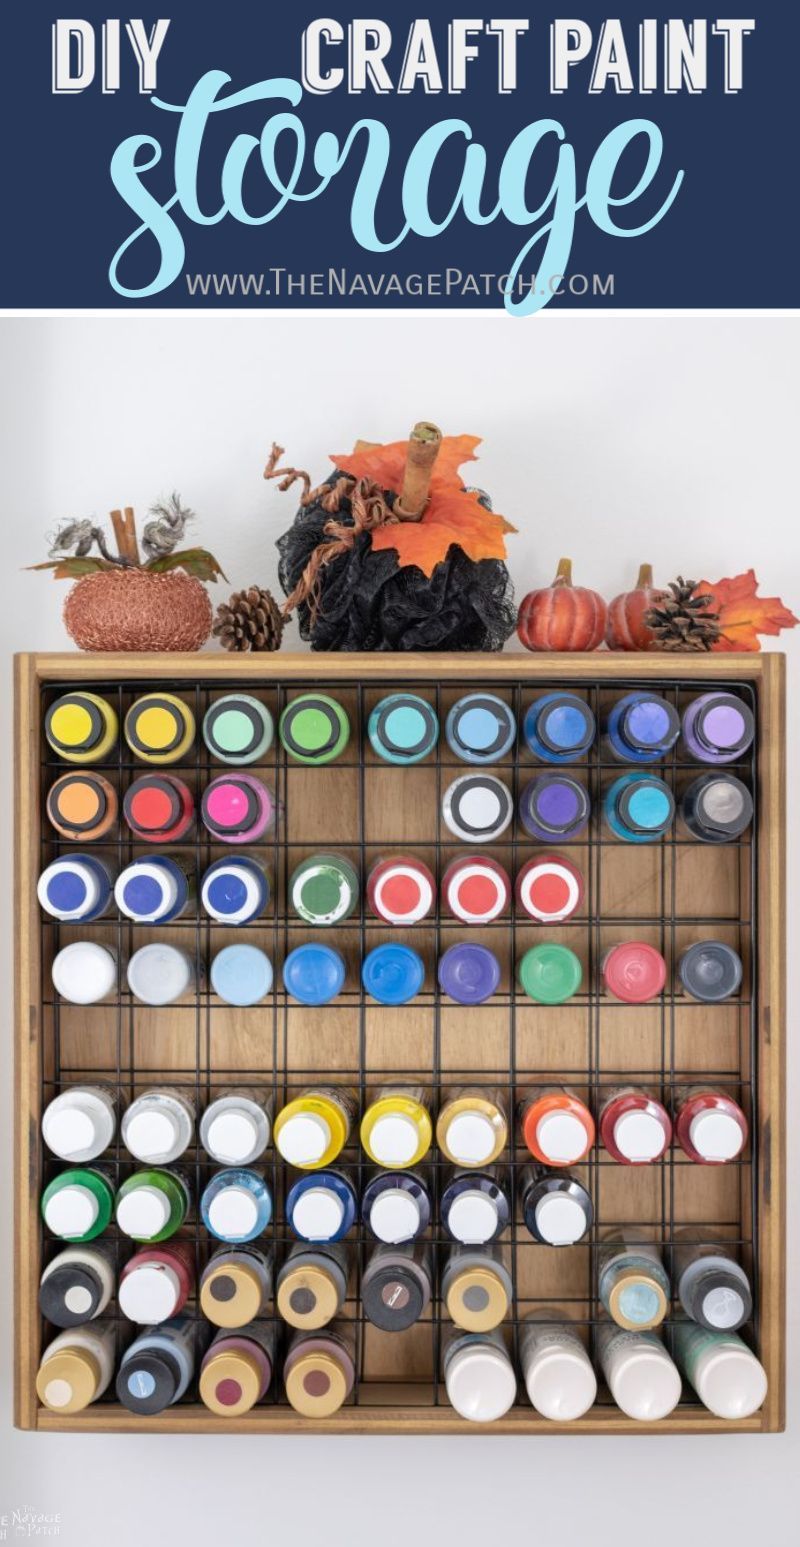 DIY Craft Paint Storage Rack from scrap wood and wire shelves